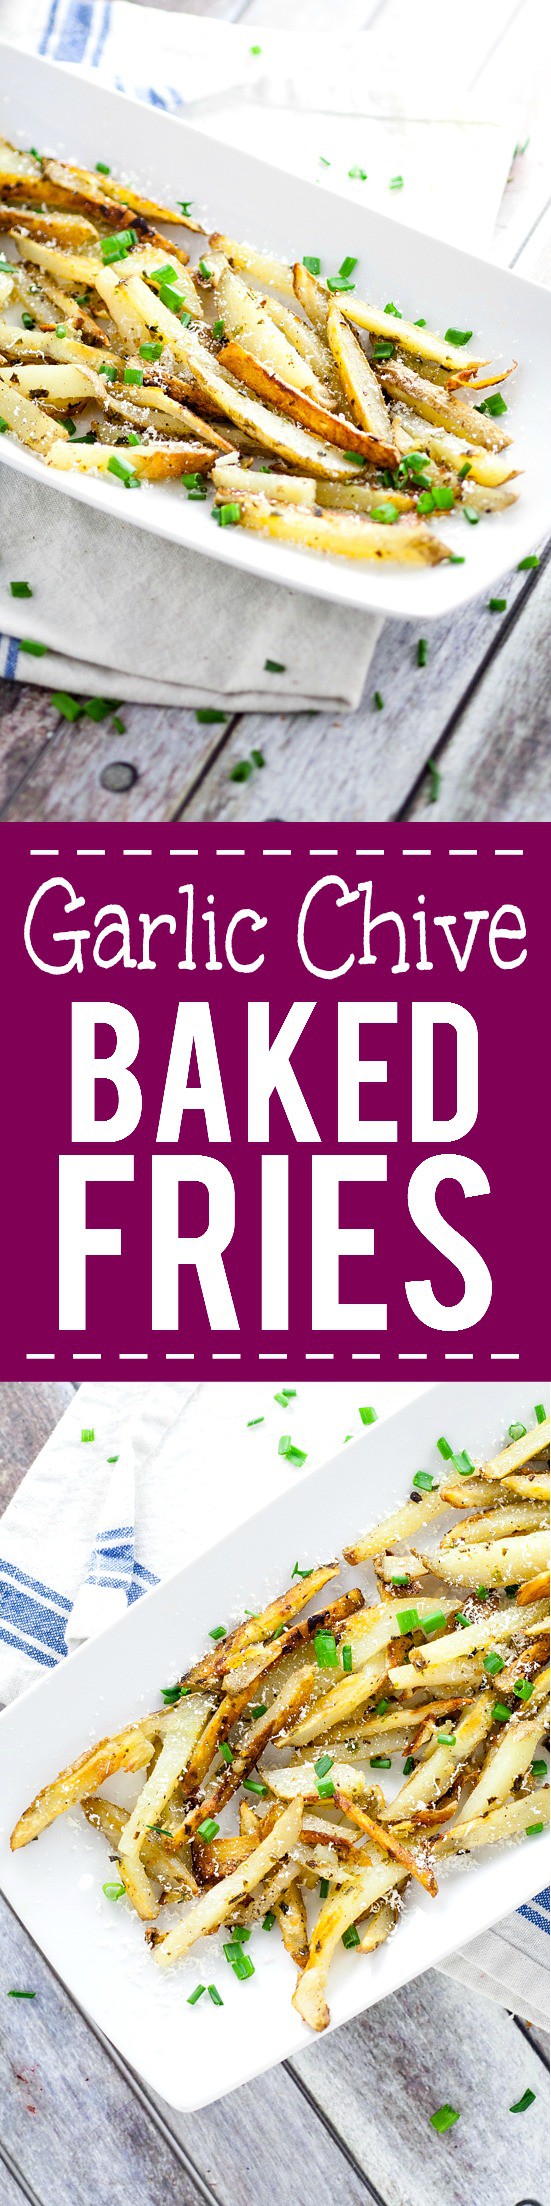 Garlic Chive Baked French Fries recipe - This Garlic Chive Baked French Fries recipe turns an American classic into a zesty new favorite with fresh garlic and chives tossed with butter and fries and baked in the oven. This looks like a fabulous quick and easy side dish recipe!  What's not to love?!